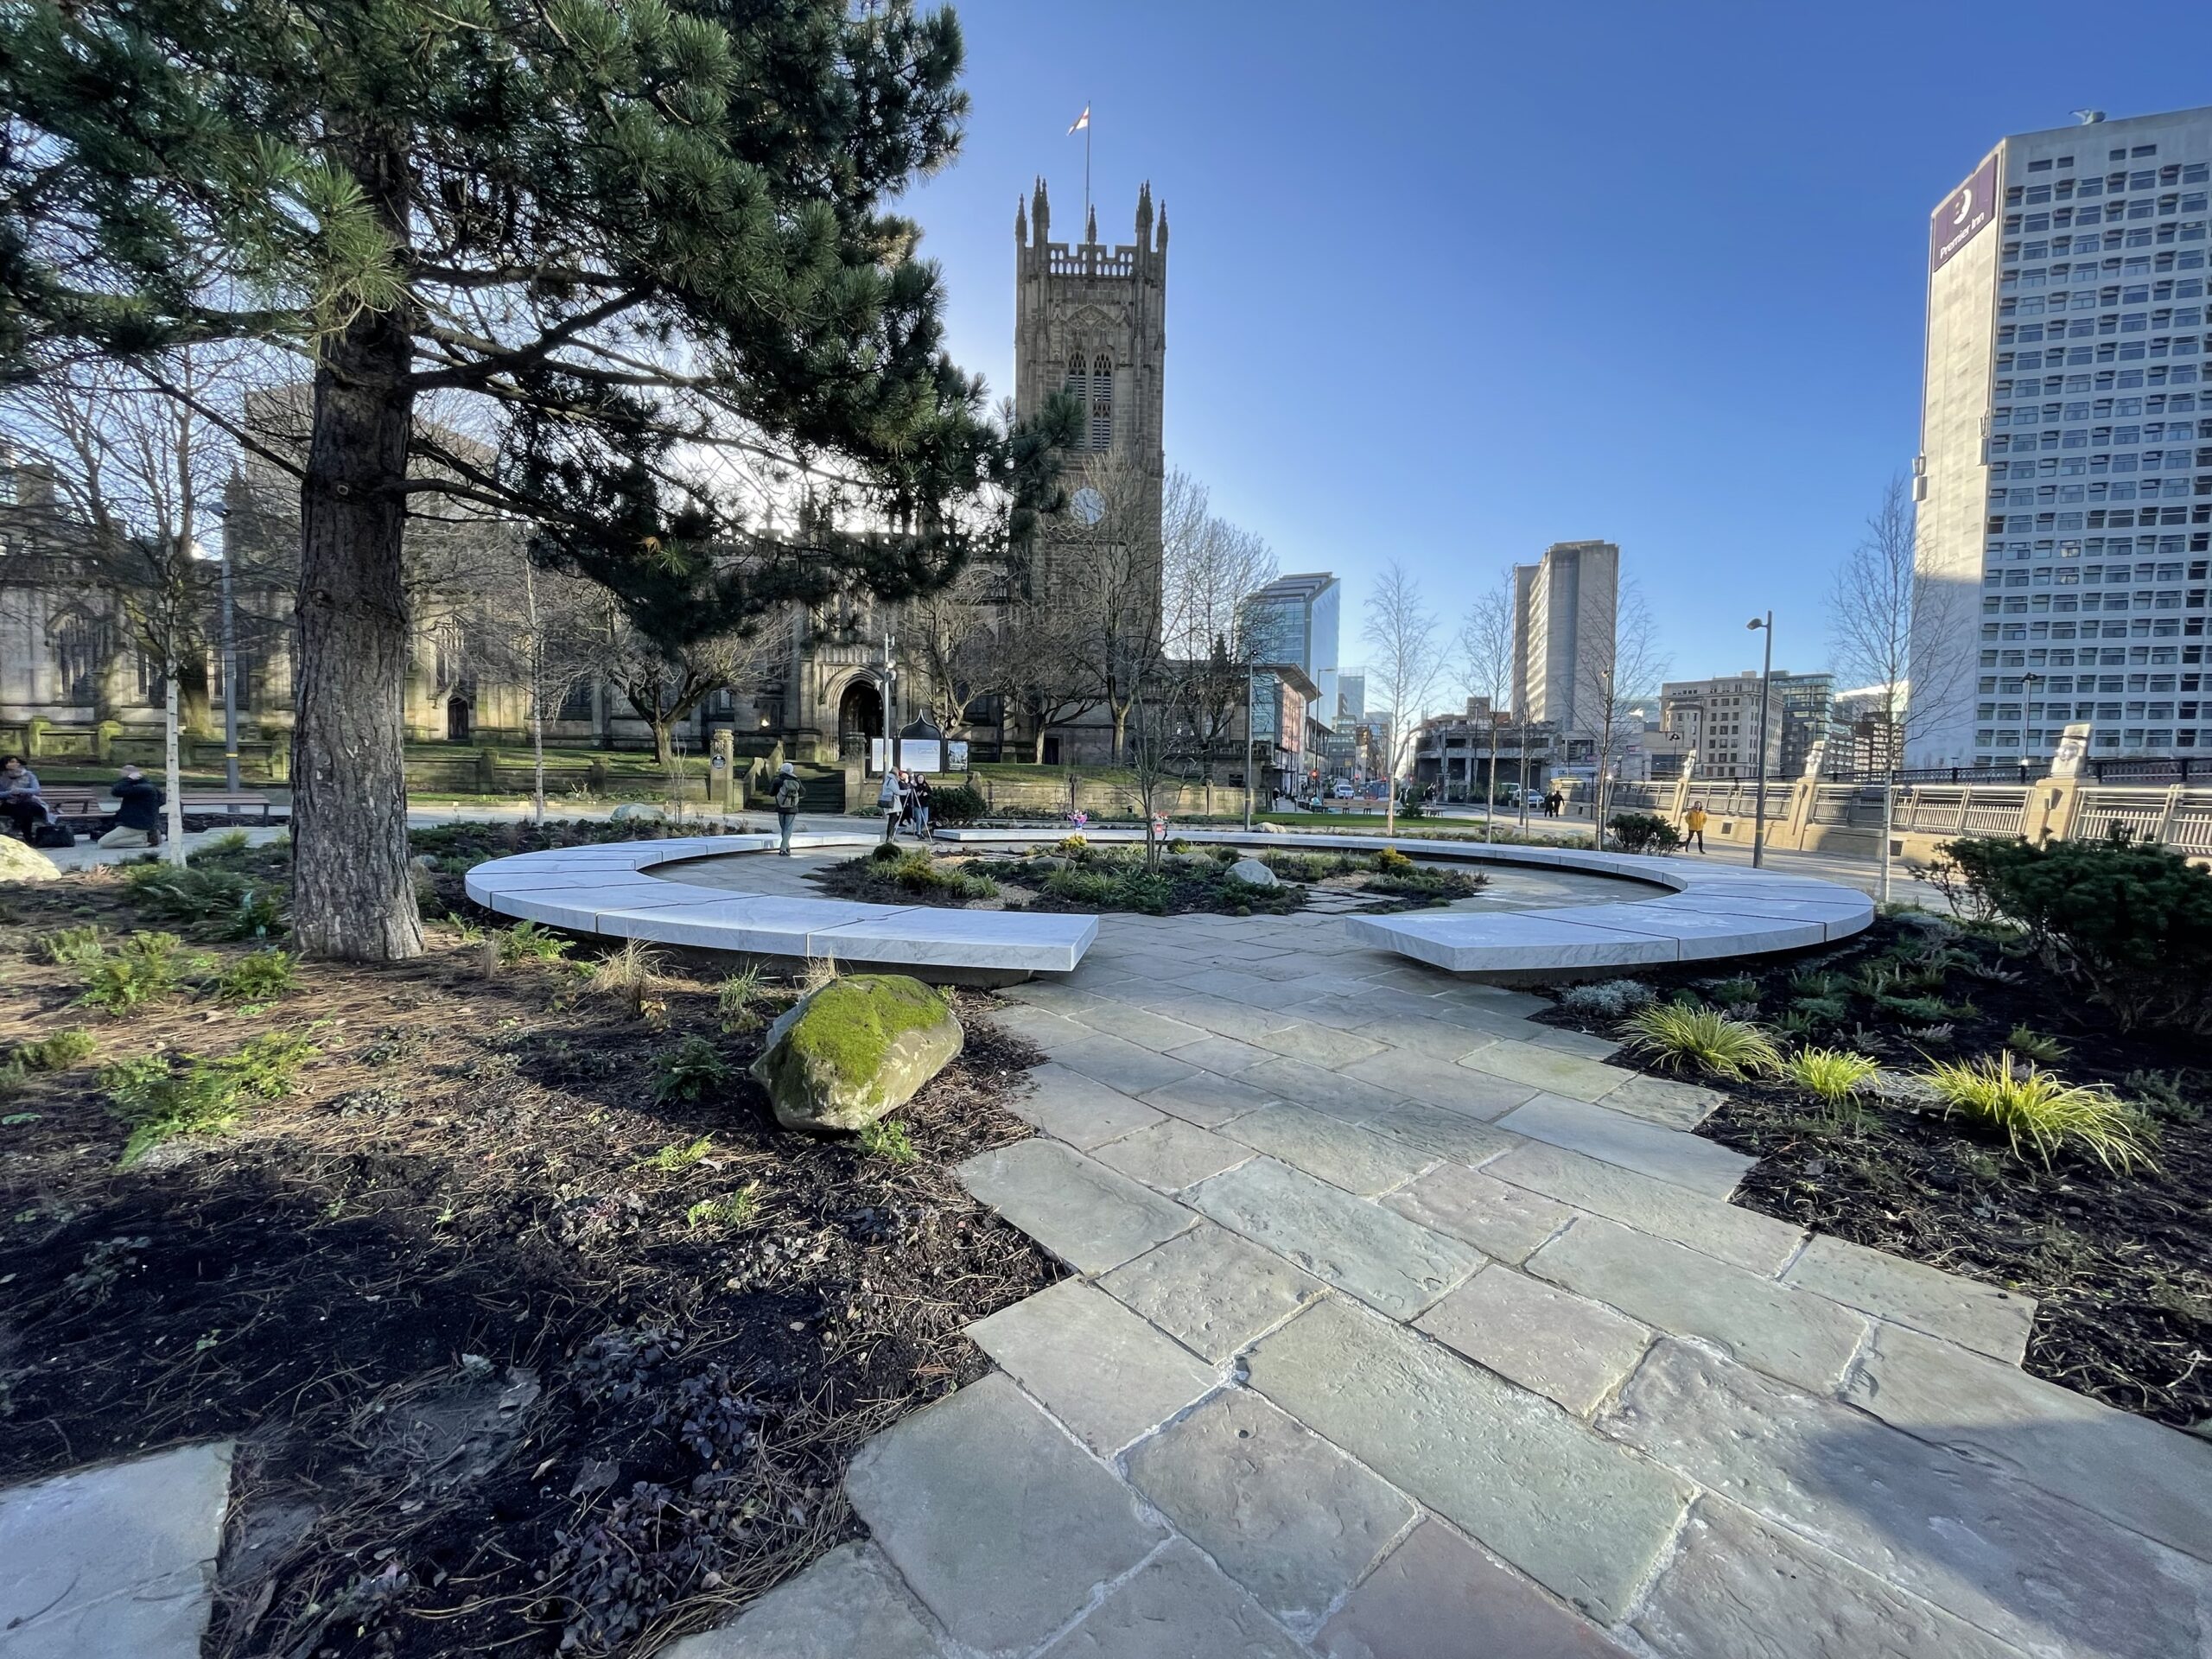 The Glade of Light memorial honours the lives lost in the Manchester Arena attack